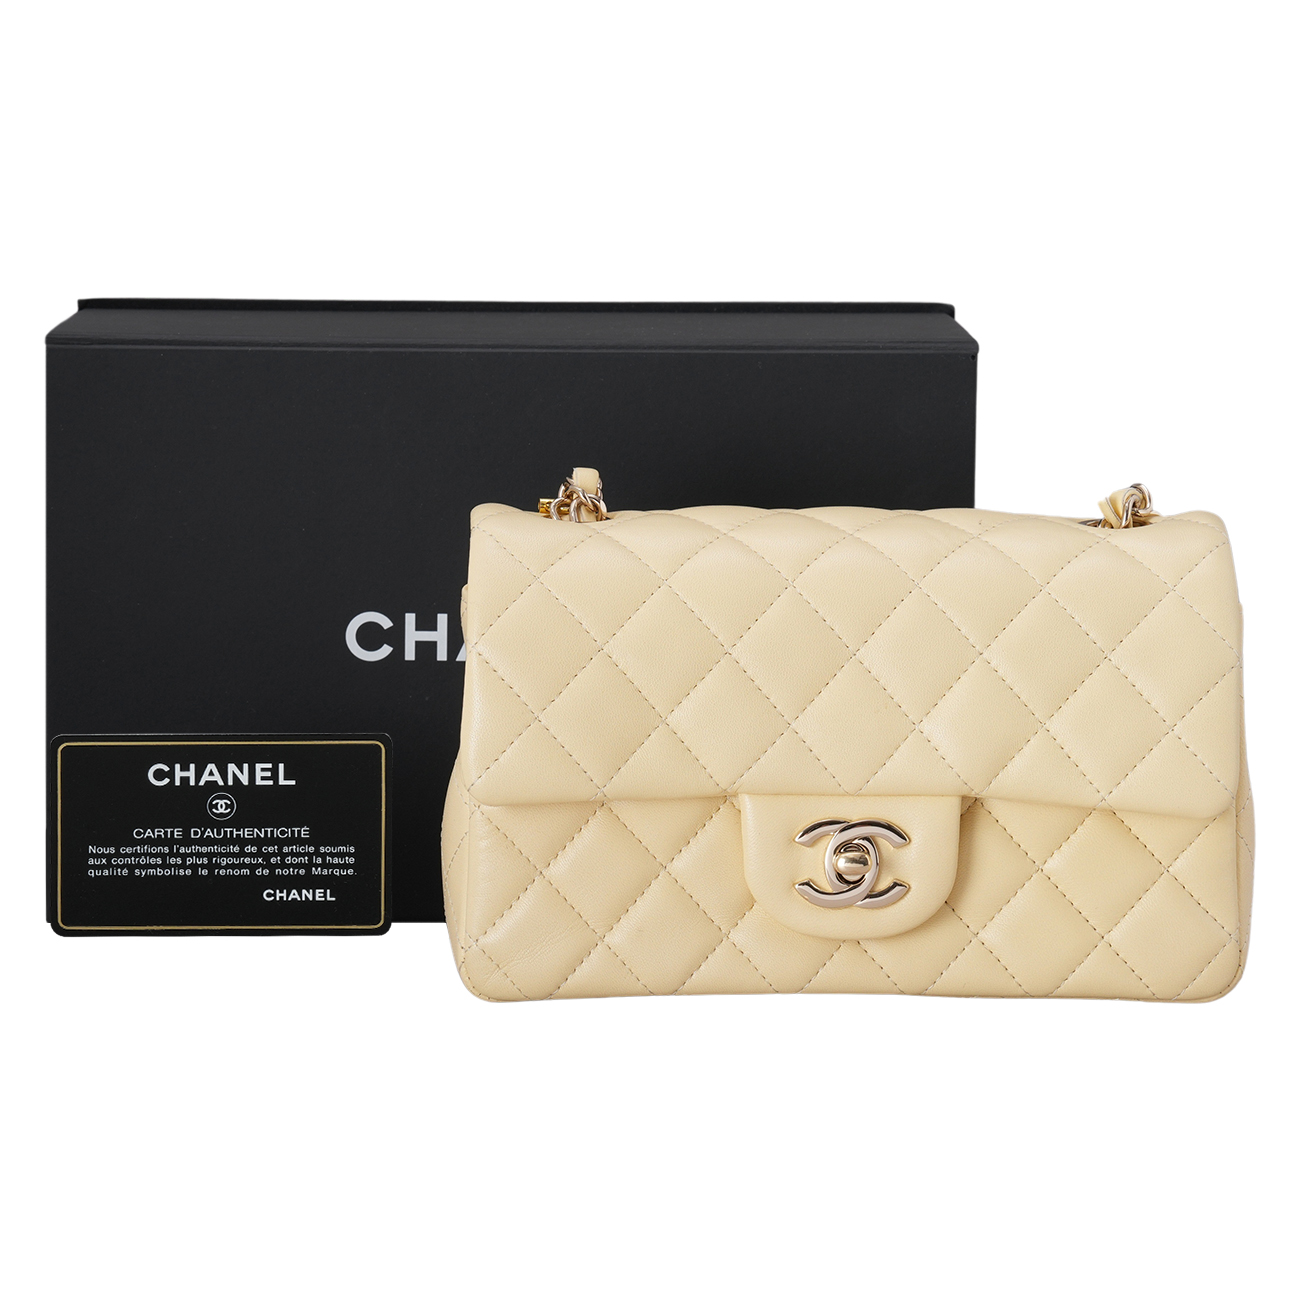 CHANEL(USED)샤넬 캐비어 램스킨 뉴미니 크로스백